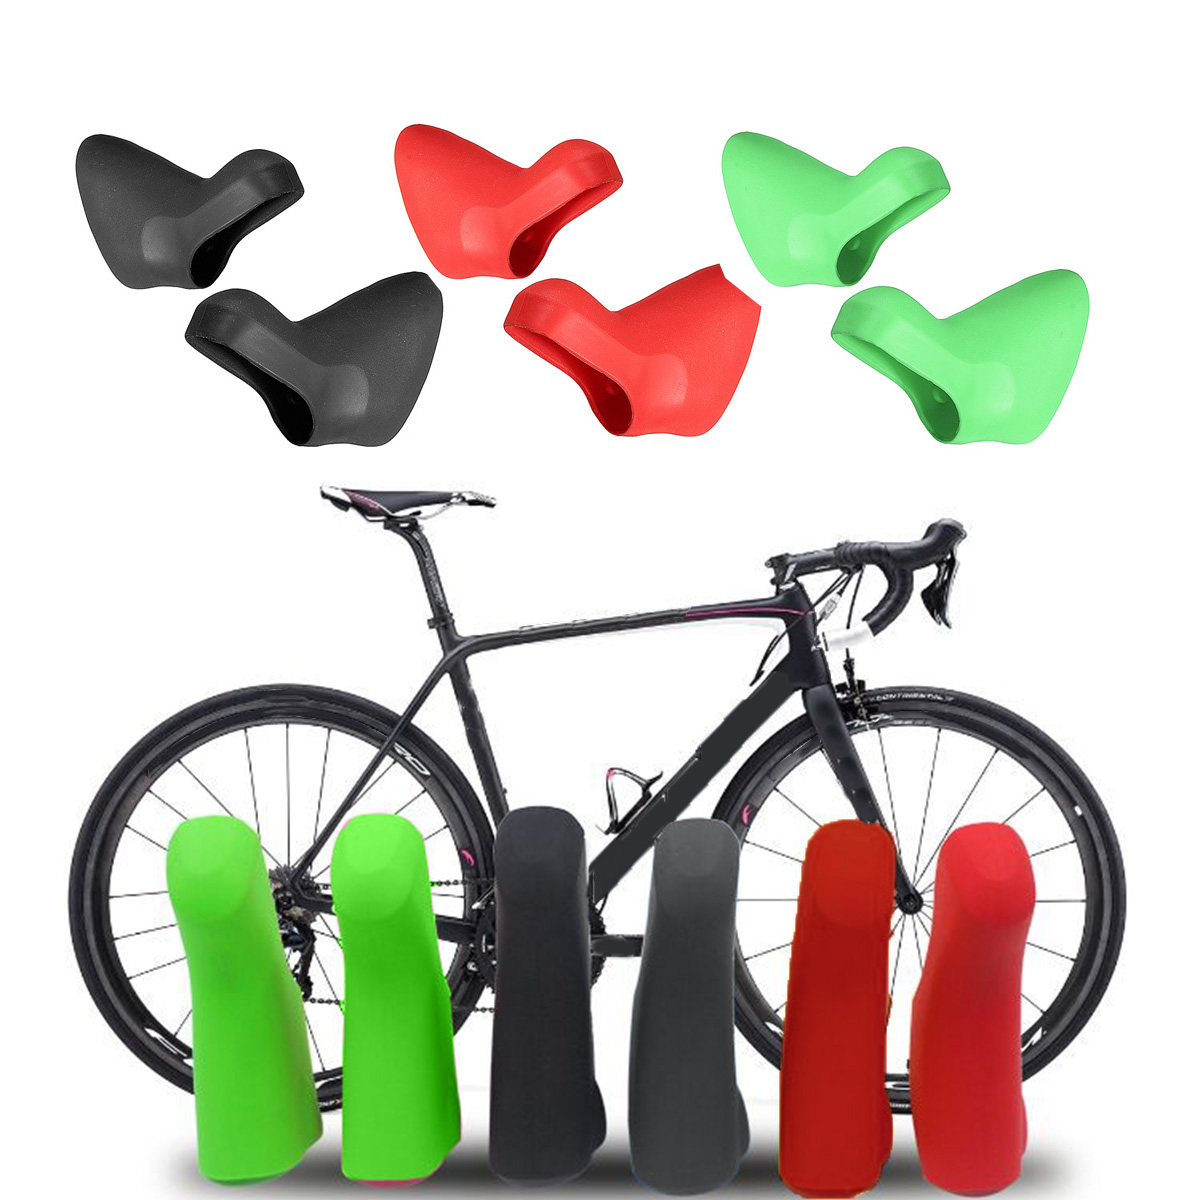 

BIKIGHT Silicone Bike Bicycle Shifter Cover Road Bike Brake Shift Lever Cover For 20 Speed SRAM